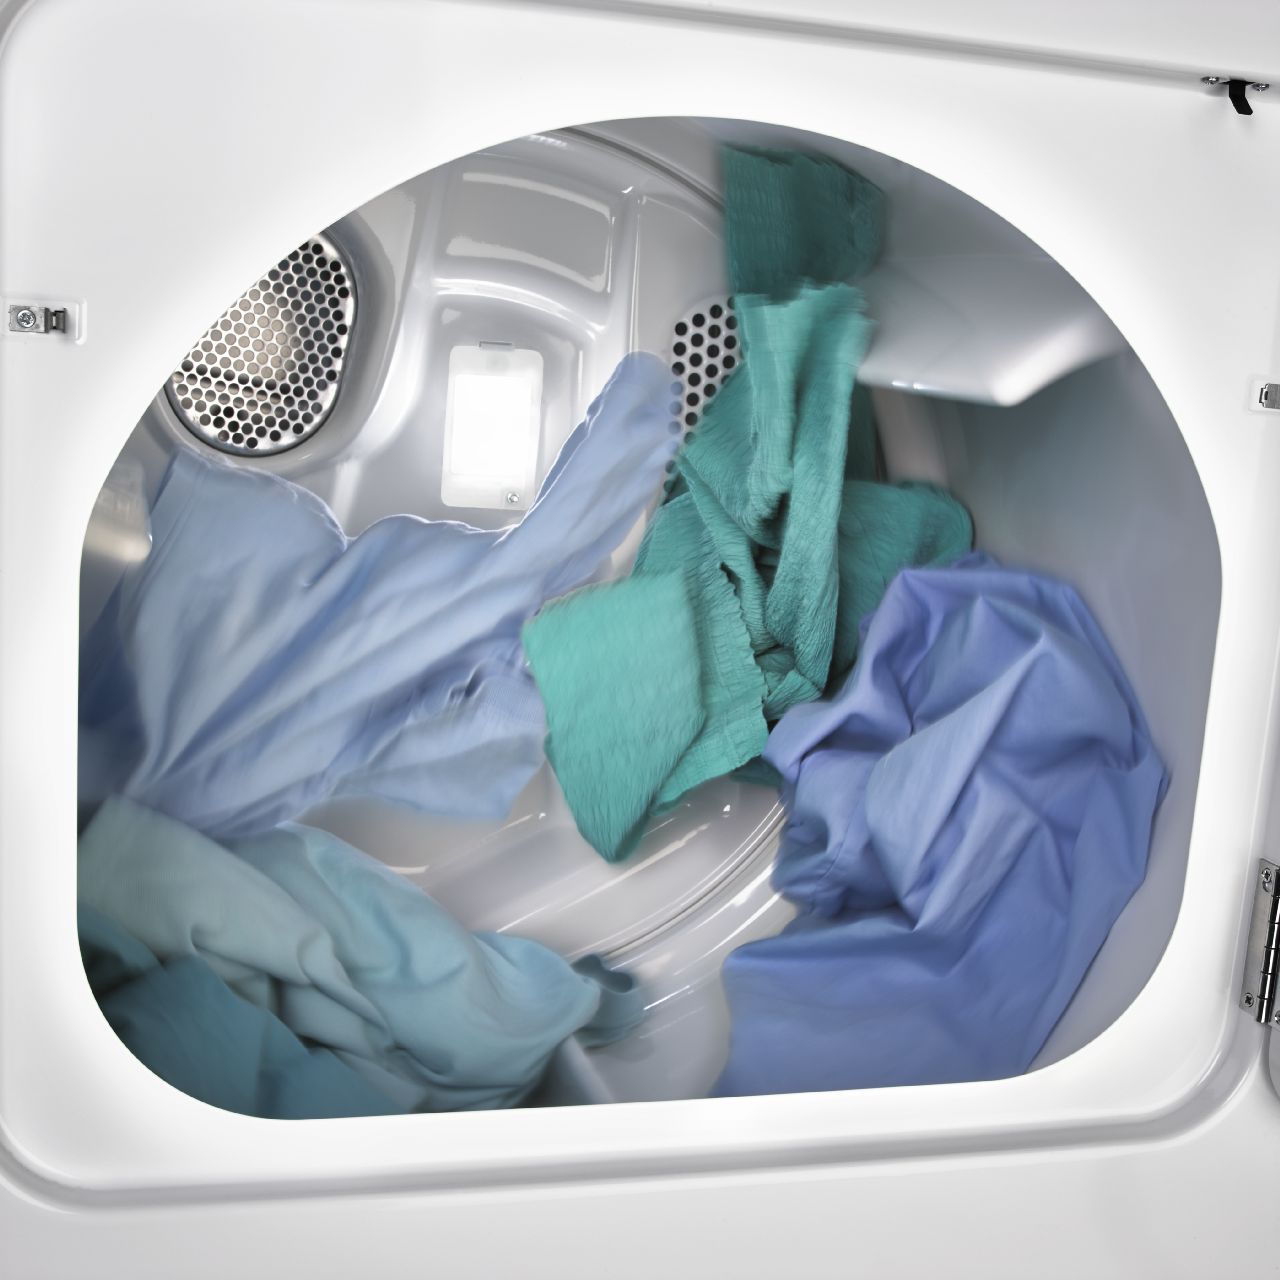 Featured image for “Dryer Maintenance Tips”